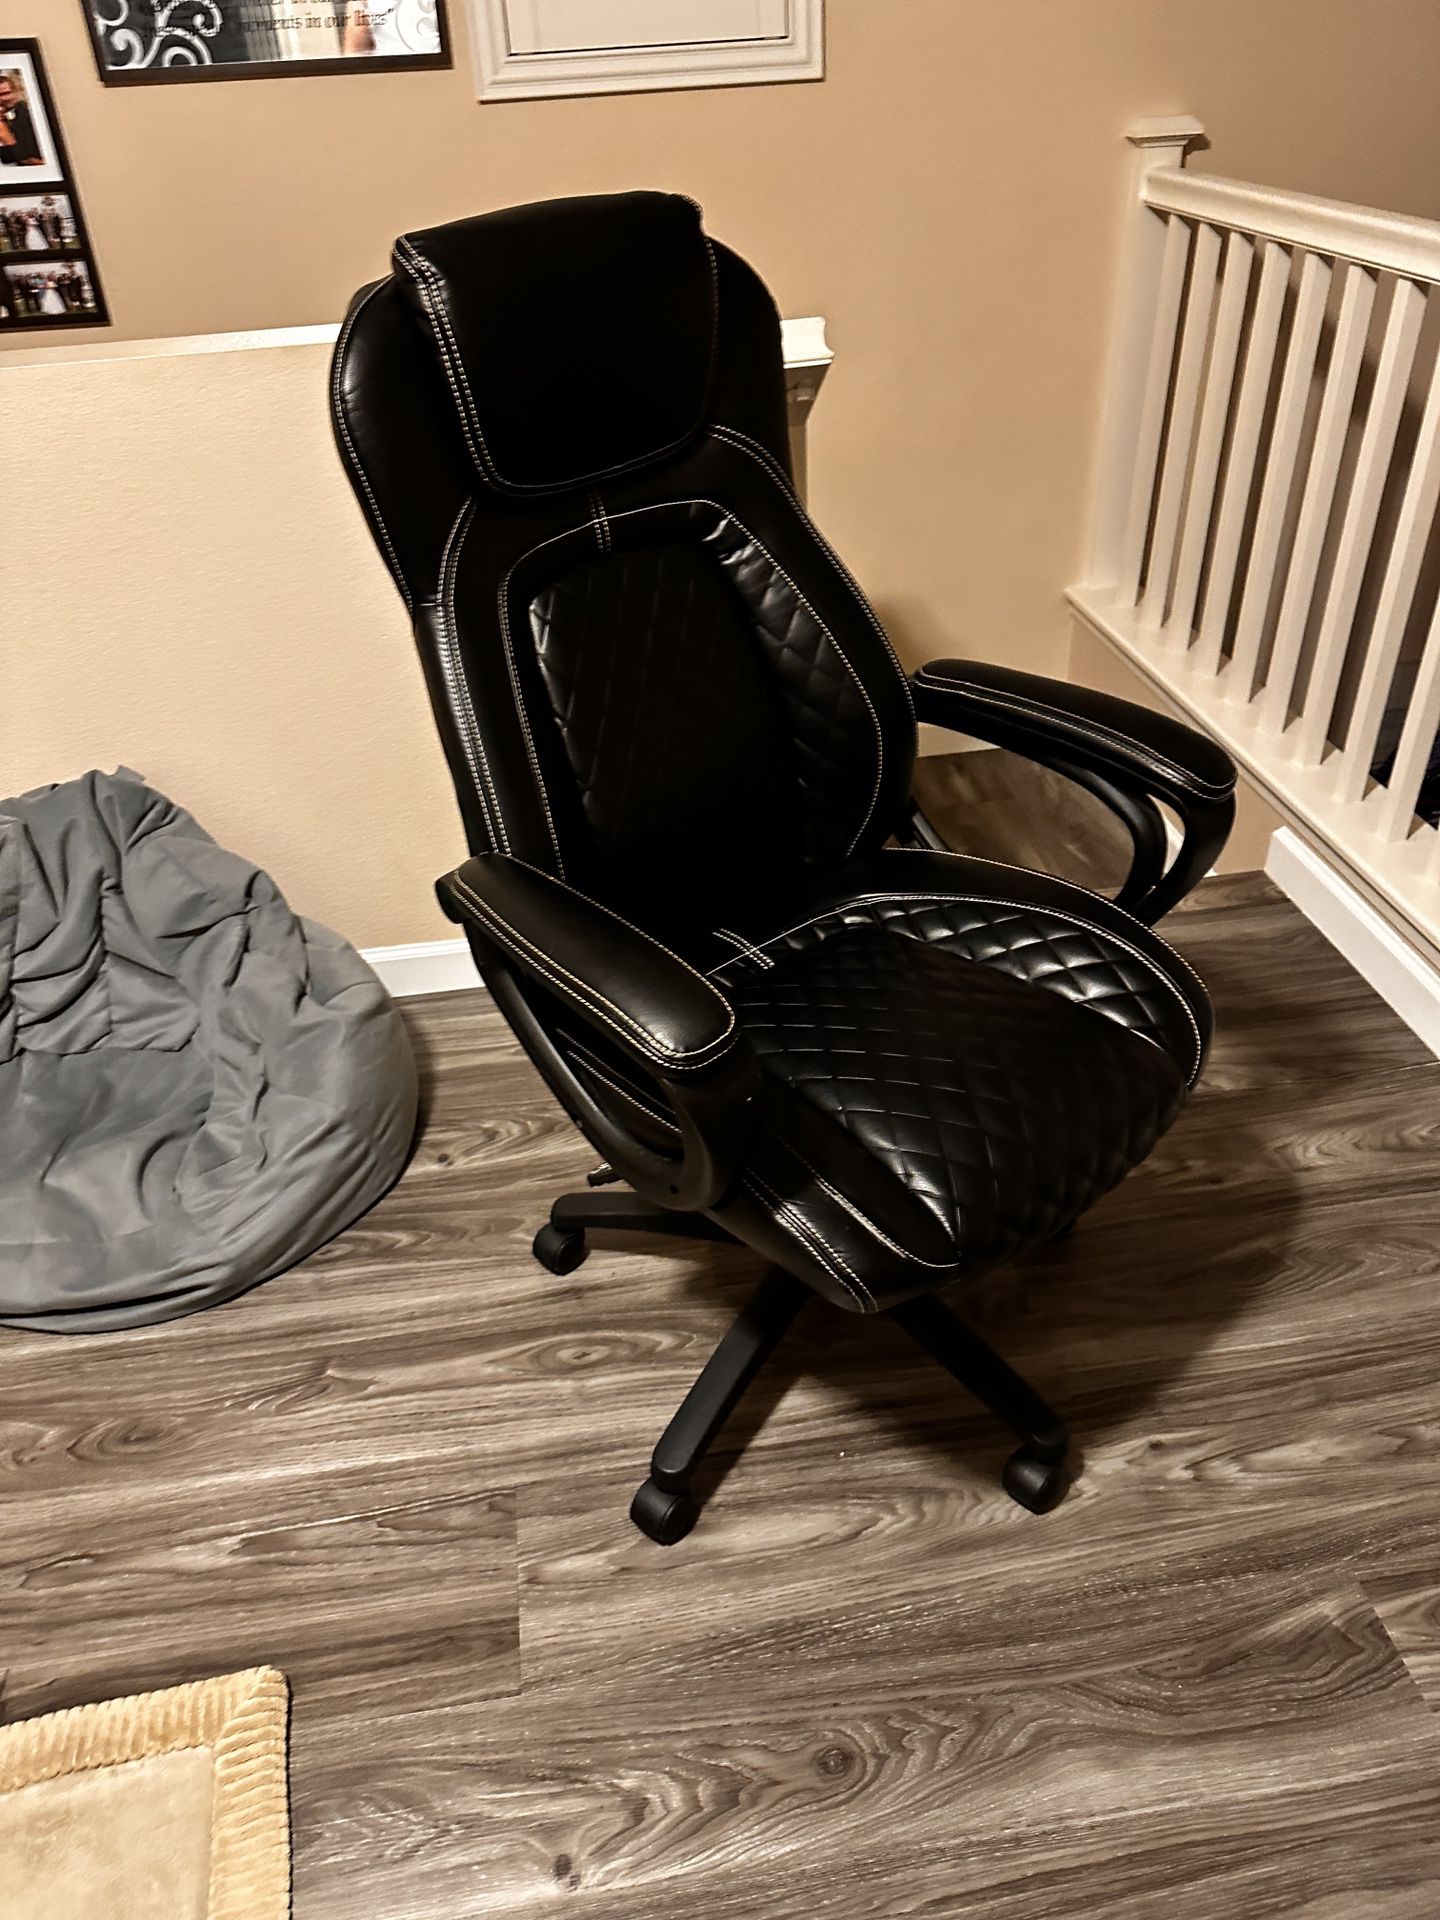 Office/Computer chair